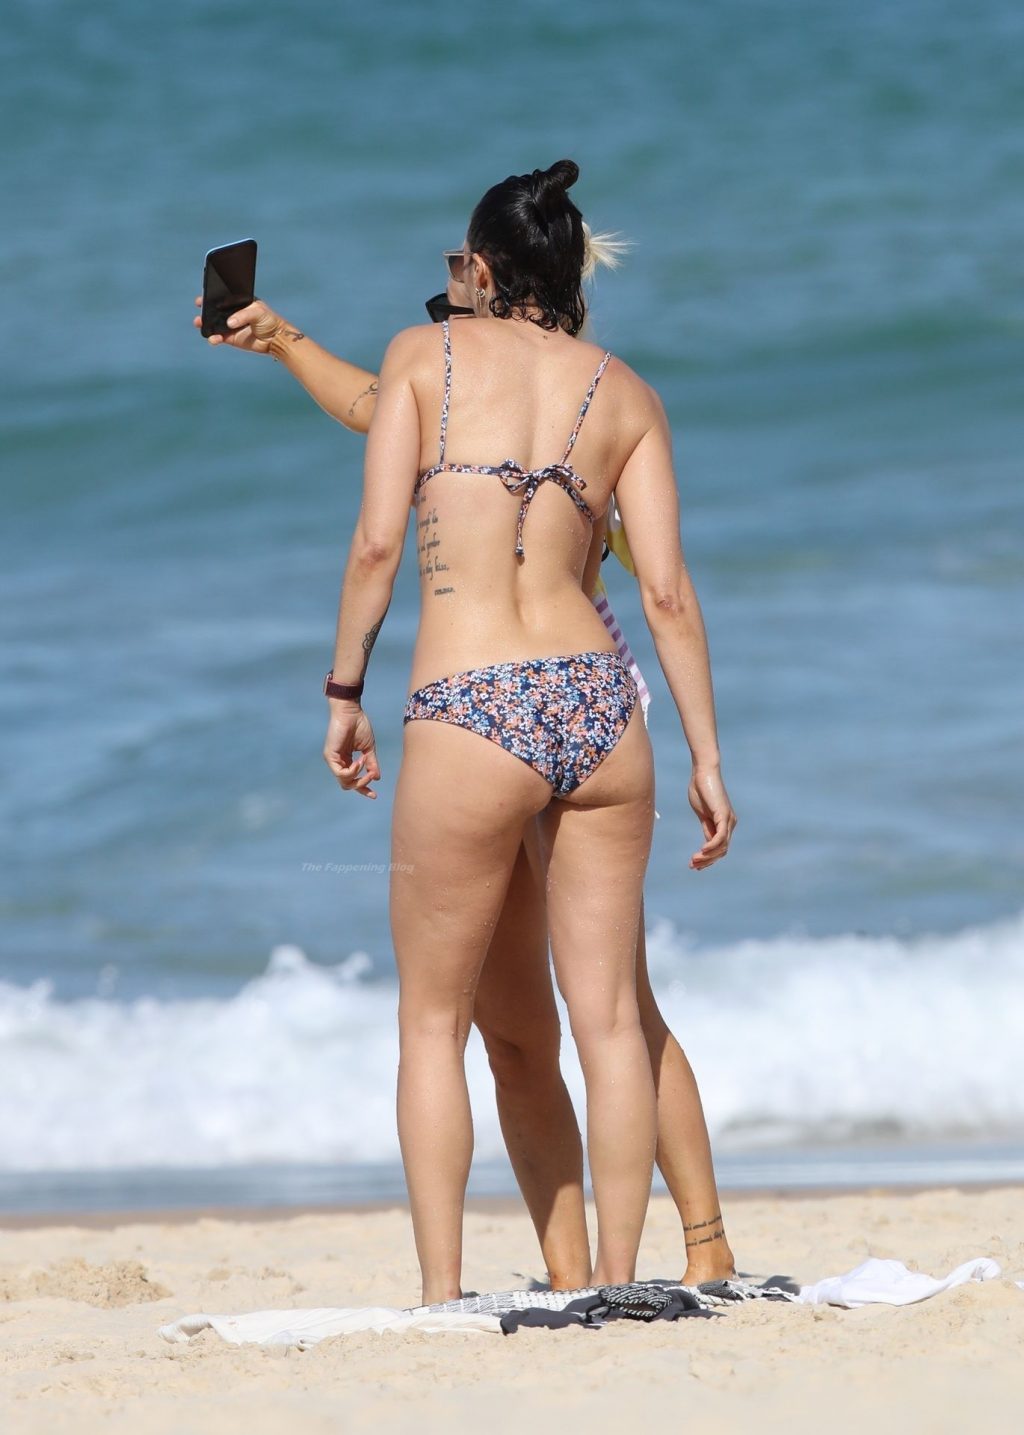 Caroline Groth is Pictured on the Beach in Sydney (23 Photos)